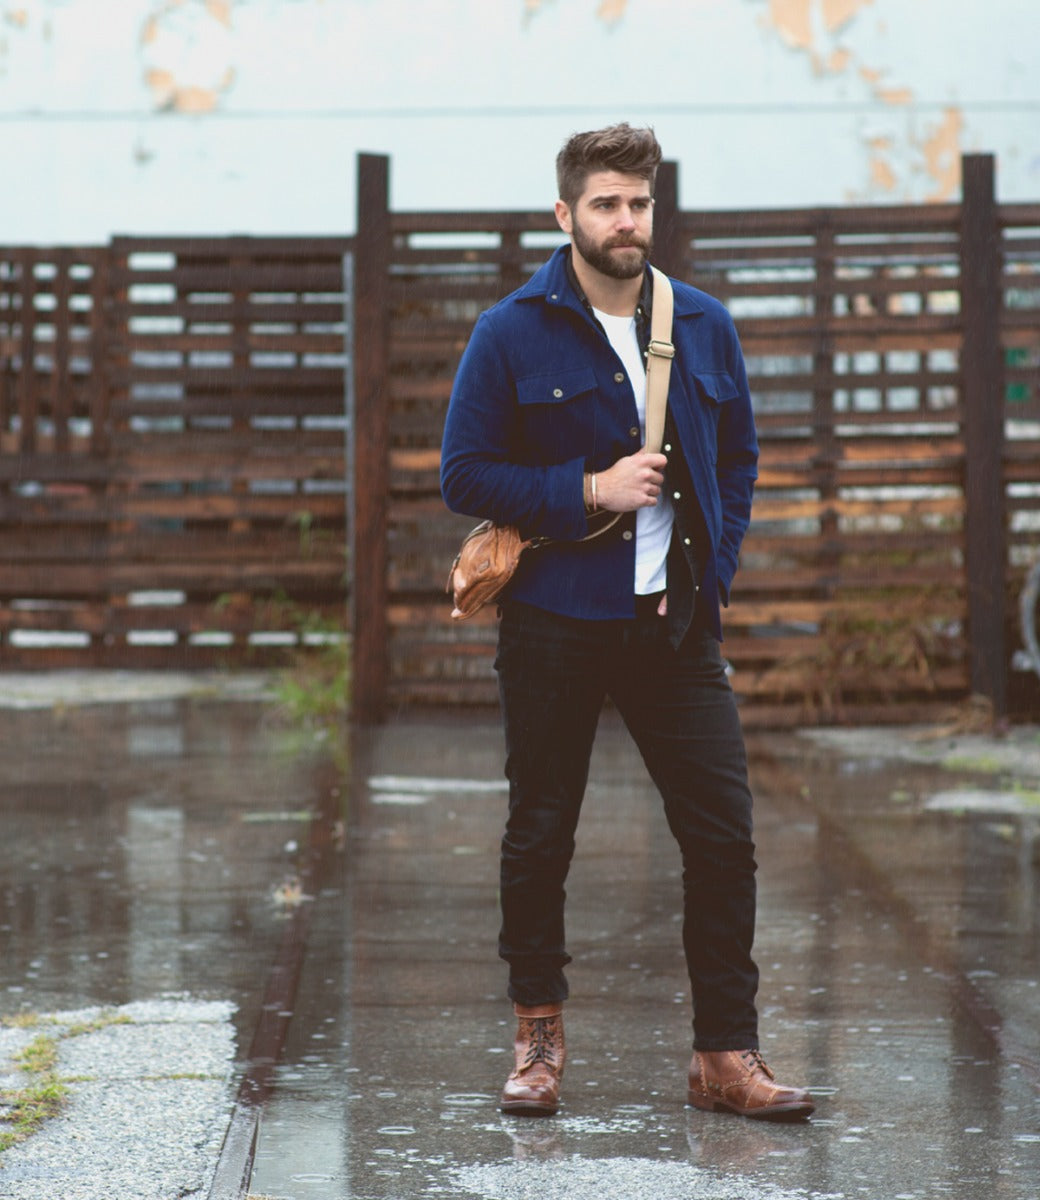 A man in a blue jacket, dark jeans, and moto-inspired boots with VIBRAM® lug outsole standing on a wet street, holding a leather bag, with a rustic fence in the background.